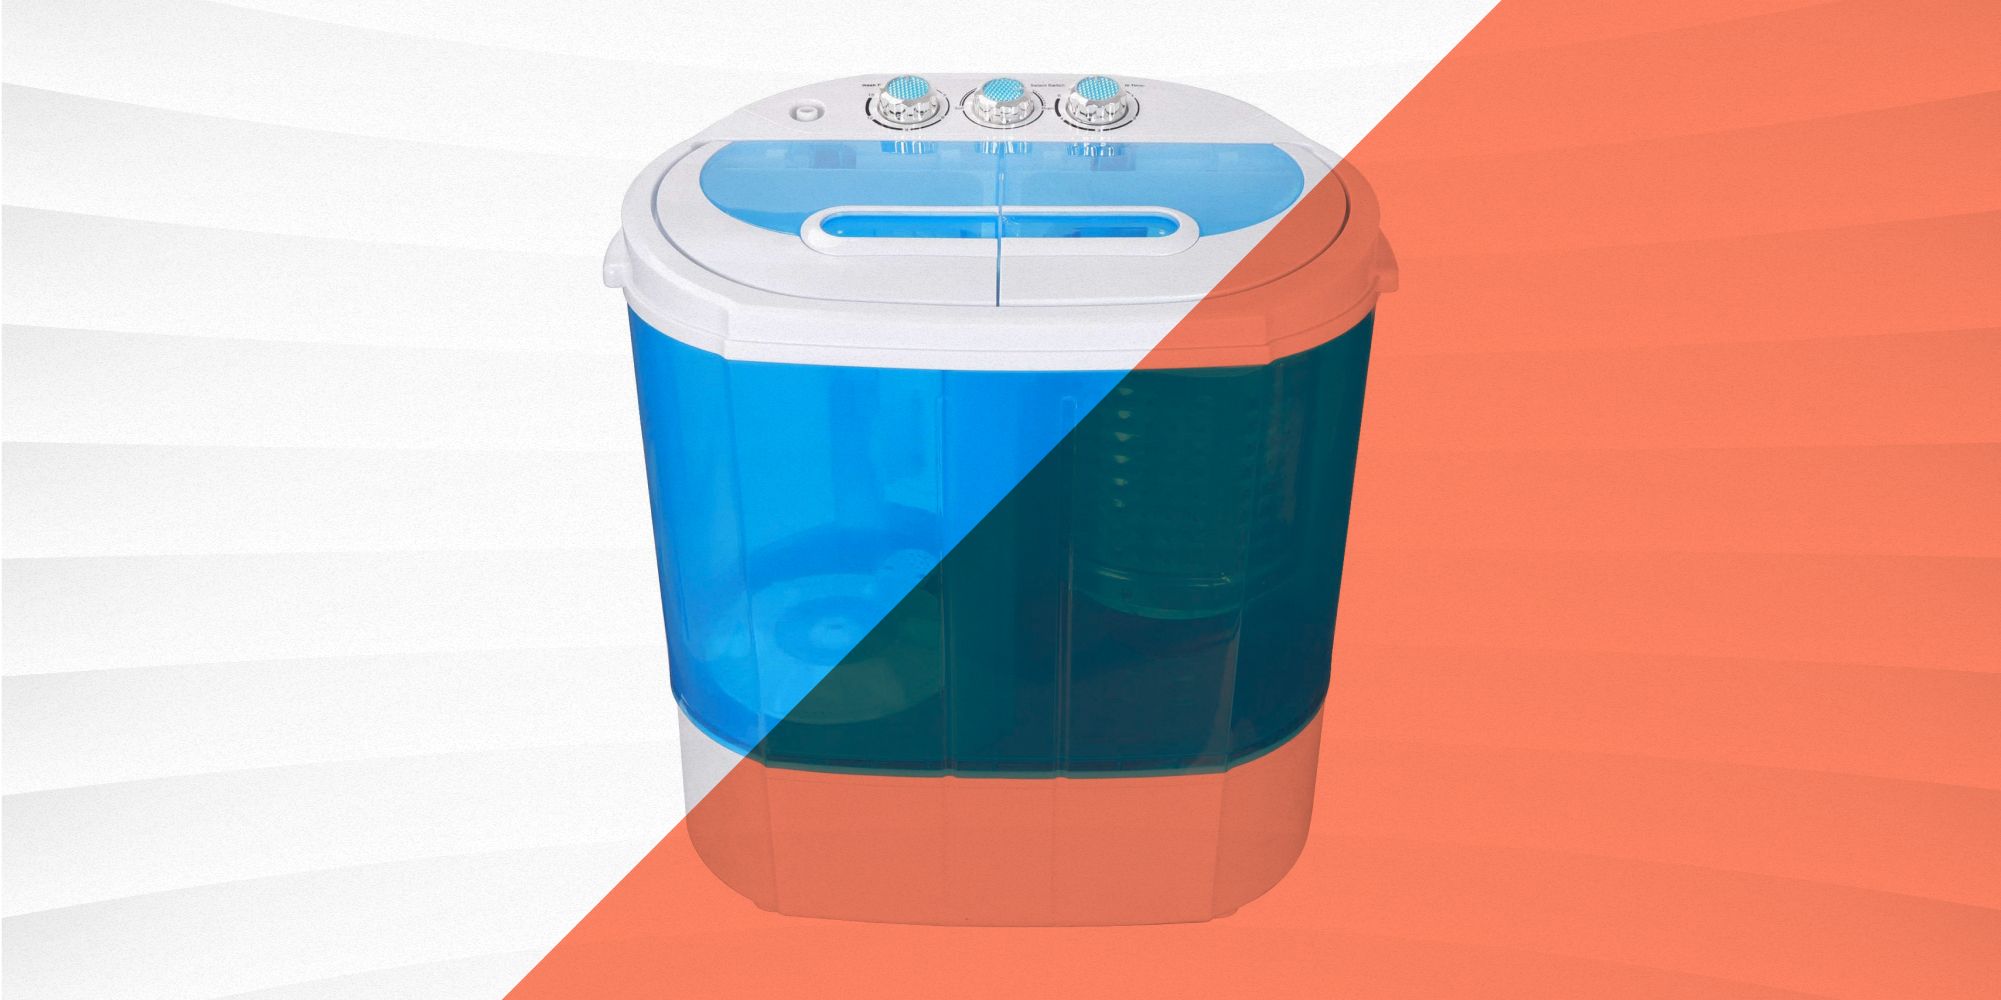 Portable Mini Washing Machine Household Semi-Automatic,Lightweight Small Laundry Washer,For Home Rv Camping Dorms College 